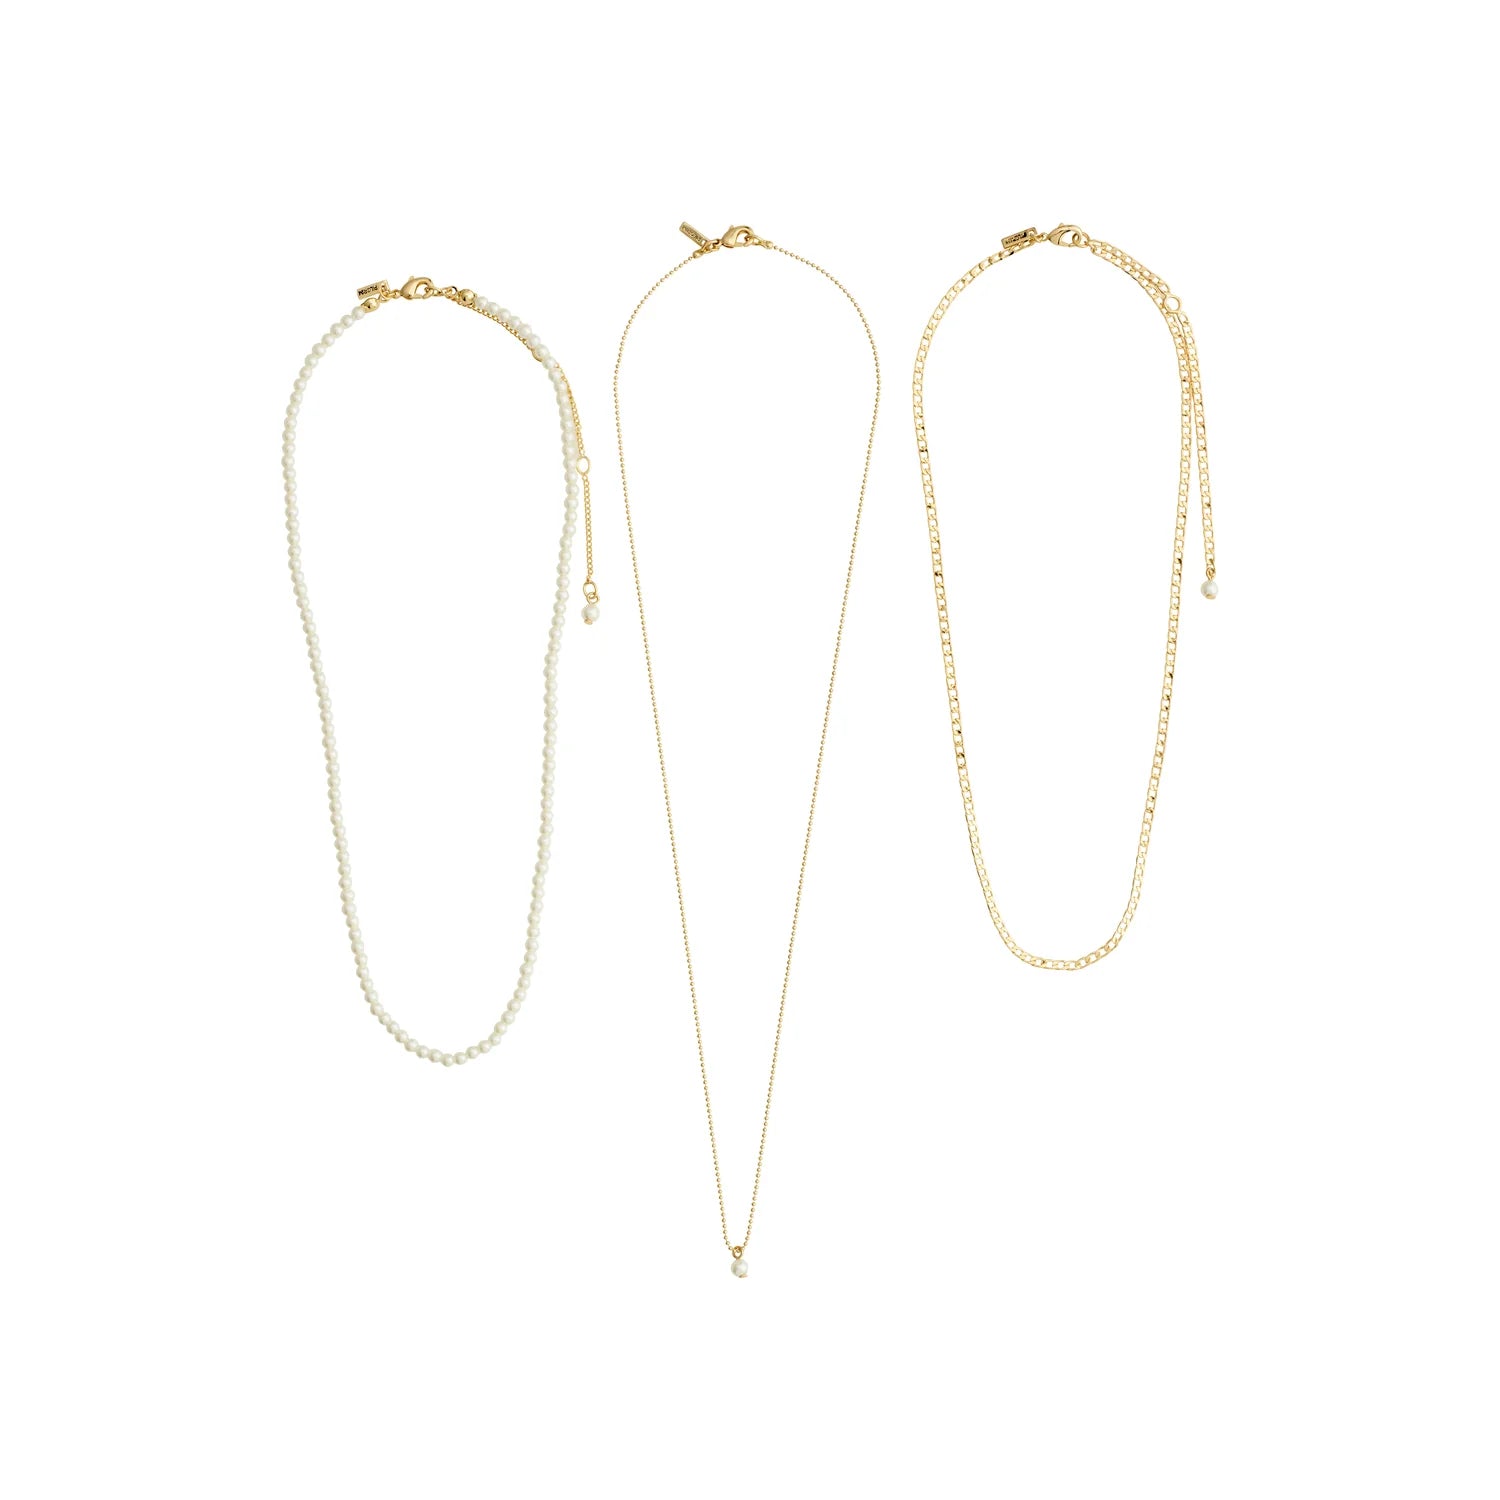 Baker necklace 3-in-1 set gold-plated - Pilgrim Jewellery